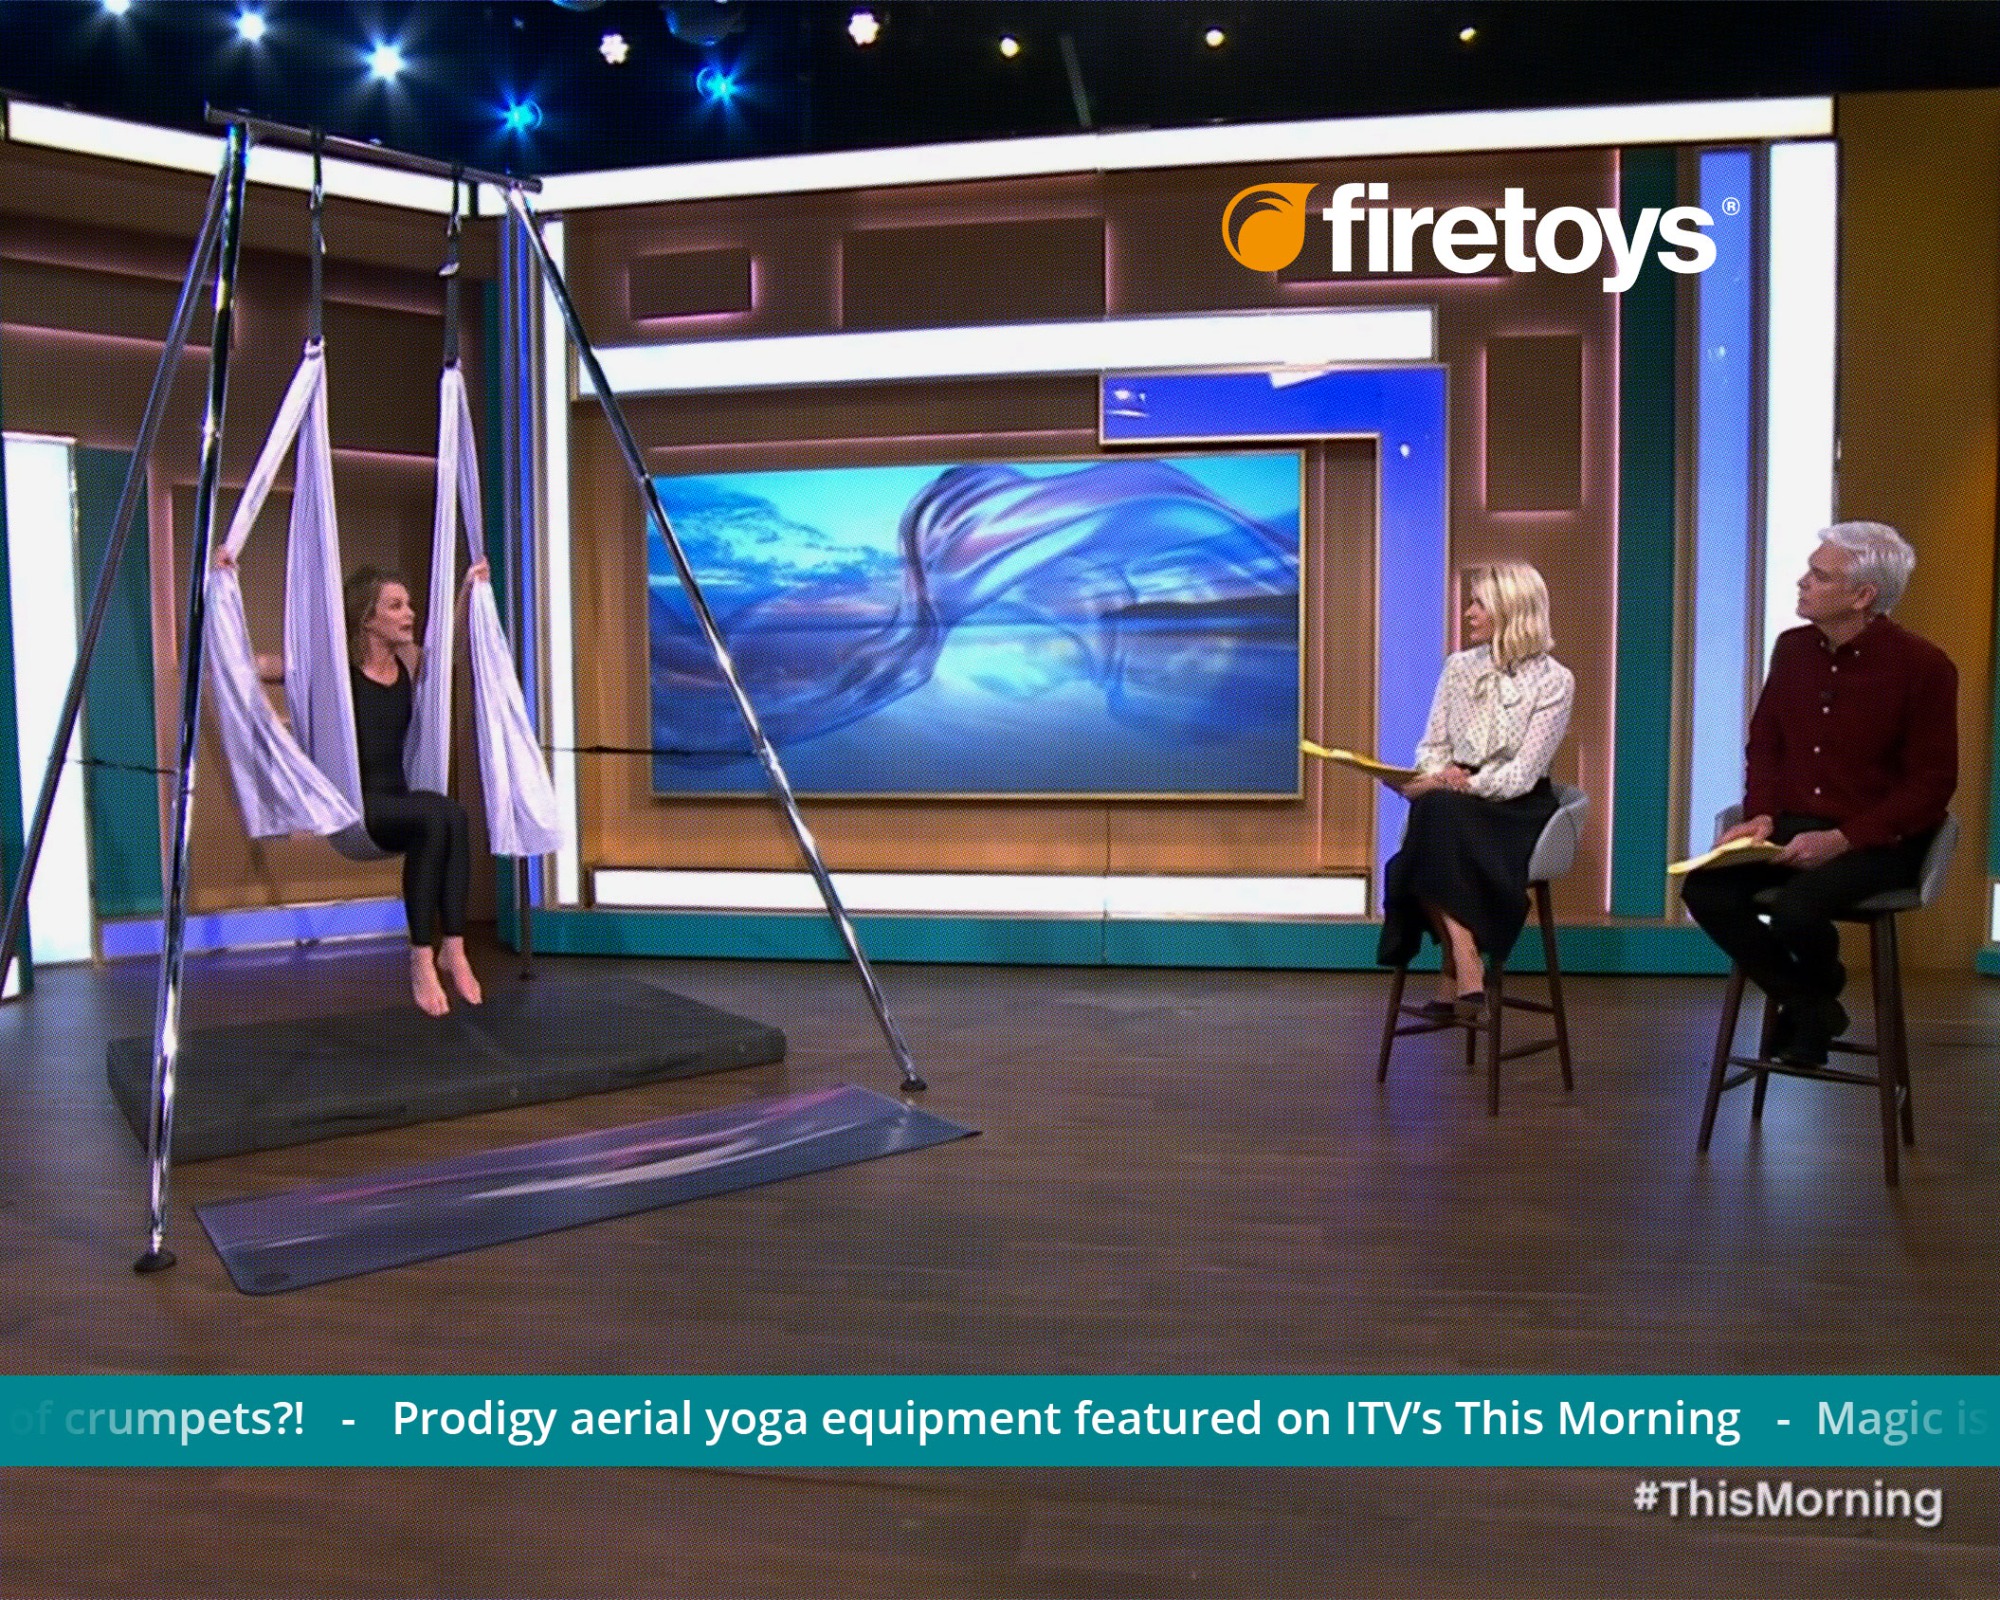 The Prodigy Aerial Yoga Rig as featured on ITV's This Morning